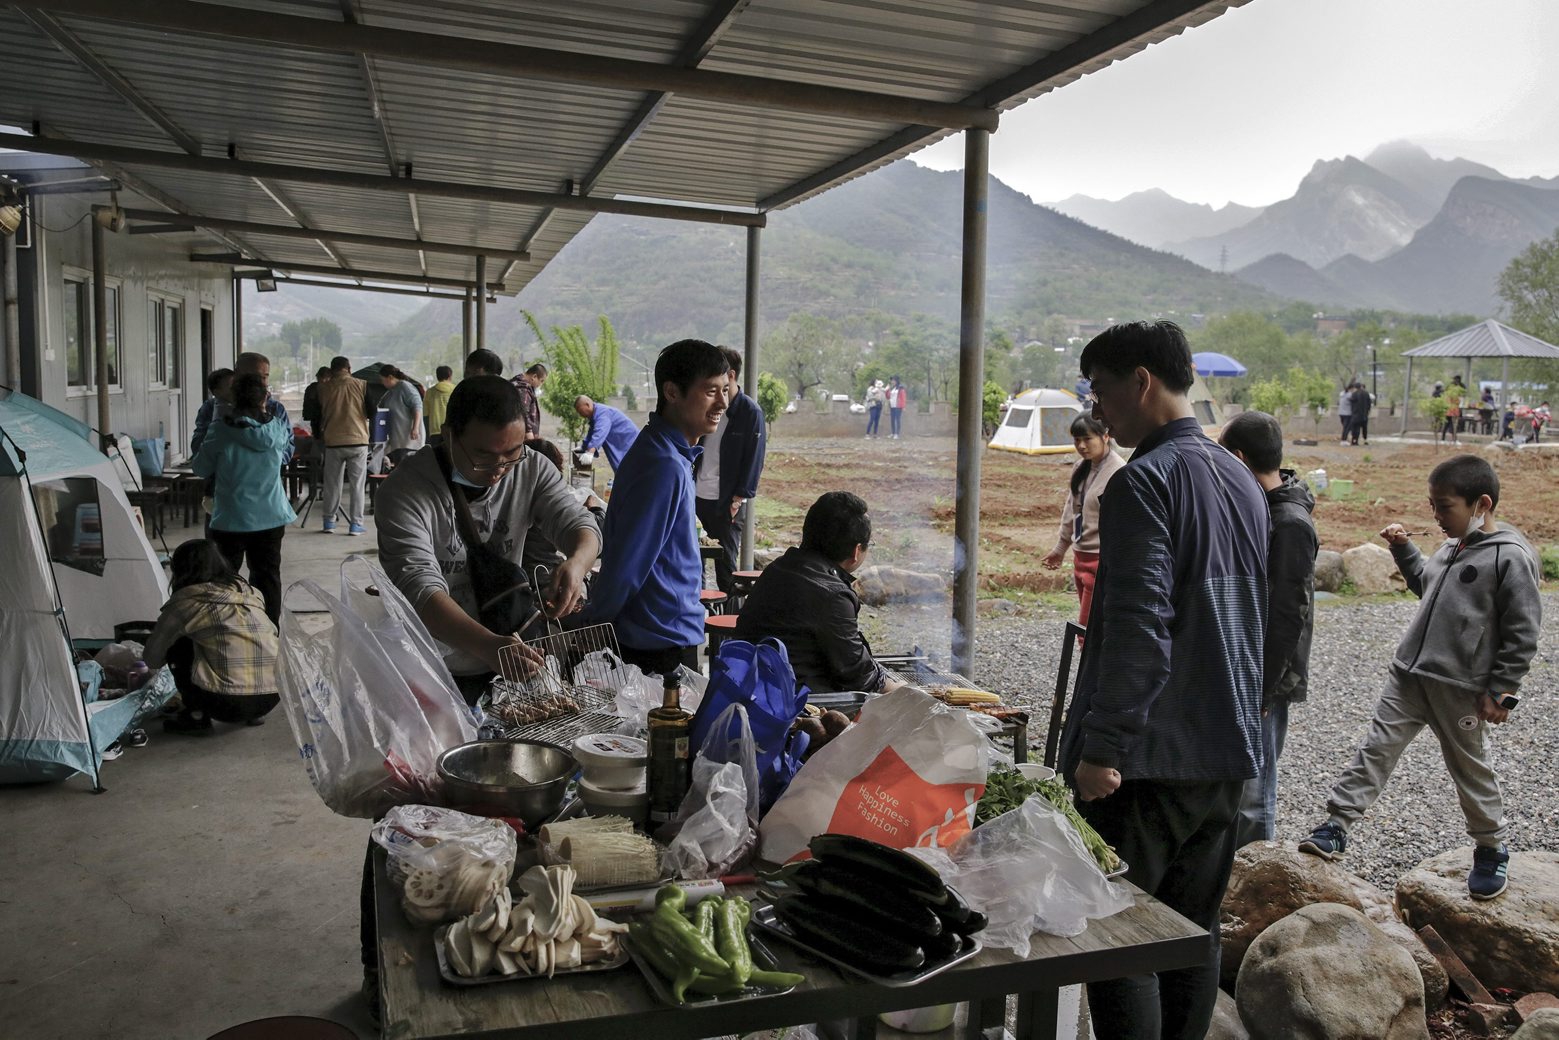 People gather for a barbecue at a scenic area in Fangshan district in Beijing, Monday, May 4, 2020, after authorities loosened up nationwide restrictions following months of lockdown over the new coronavirus outbreak. China reported three new coronavirus cases Monday, all brought from overseas, and no additional deaths. (AP Photo/Andy Wong) Virus Outbreak China